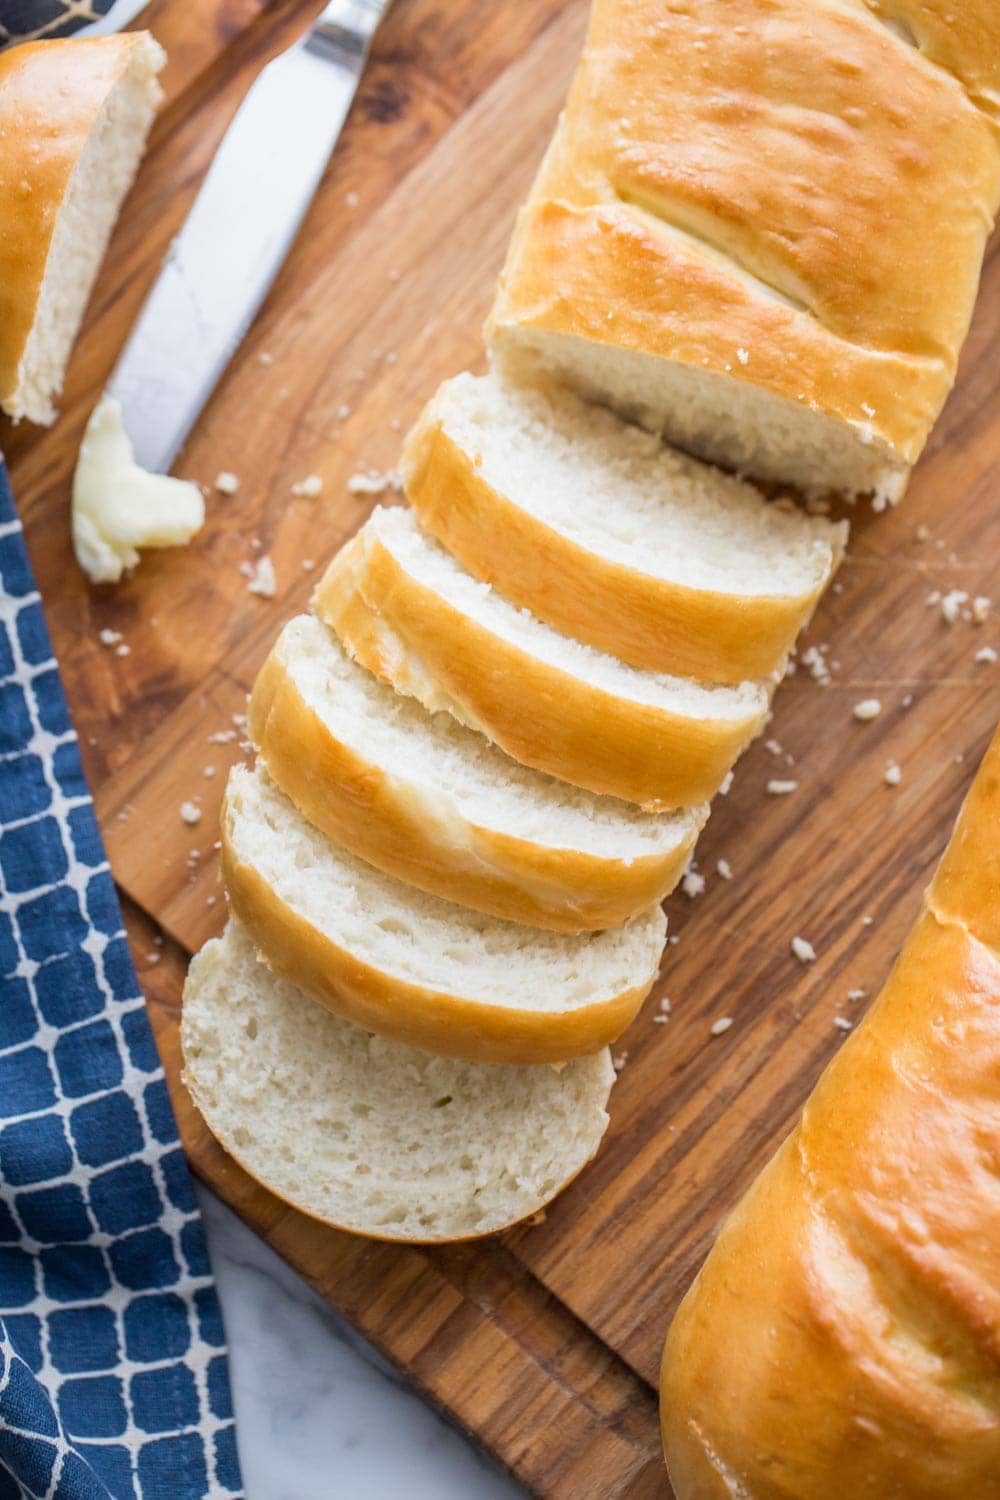 Homemade French bread recipe - sliced up